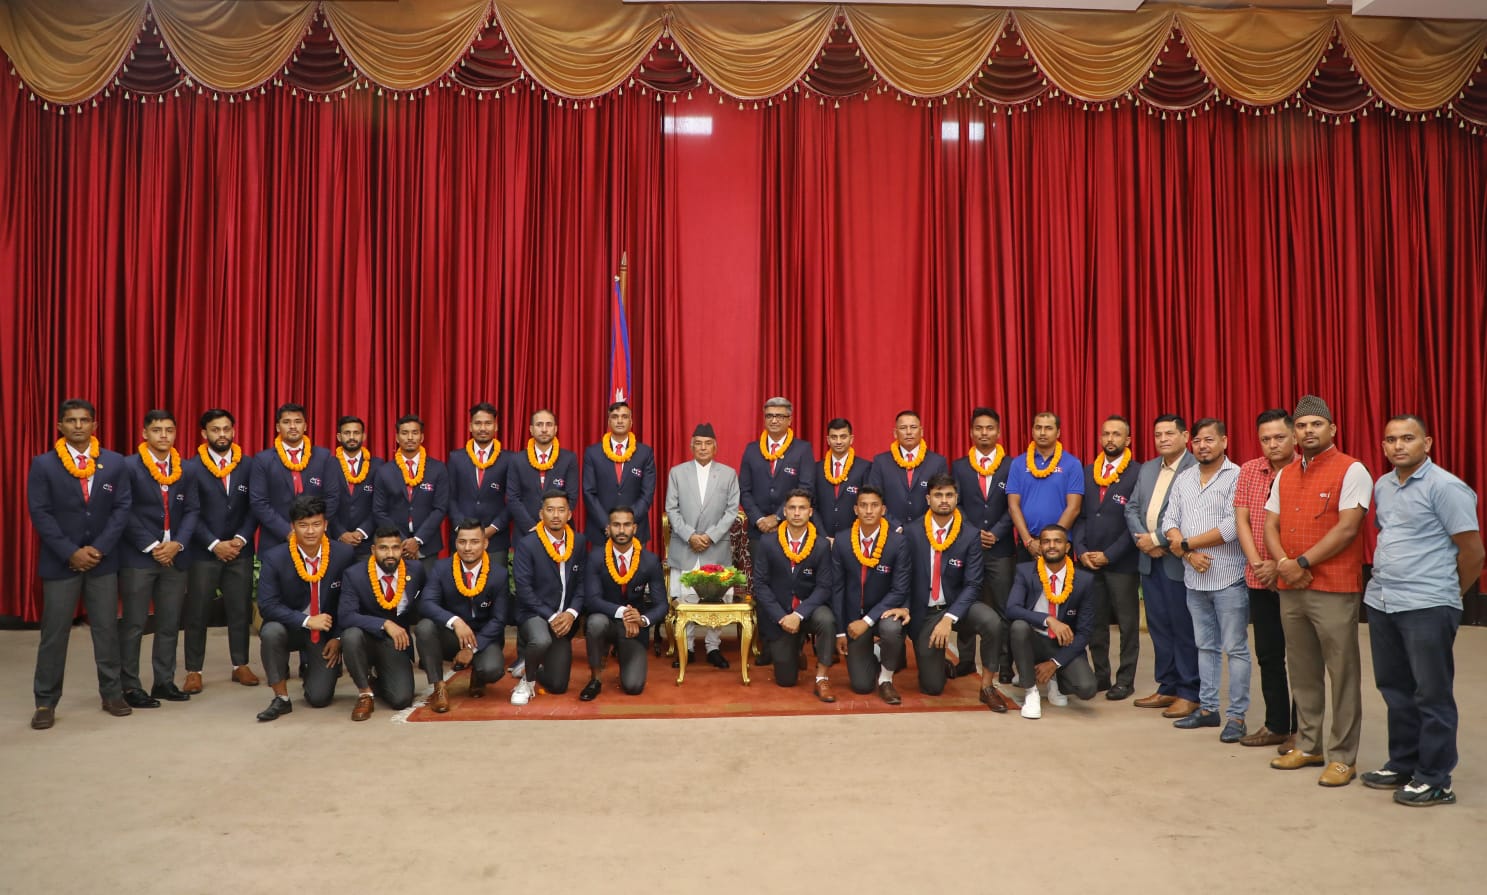 President Poudel congratulated the cricket team